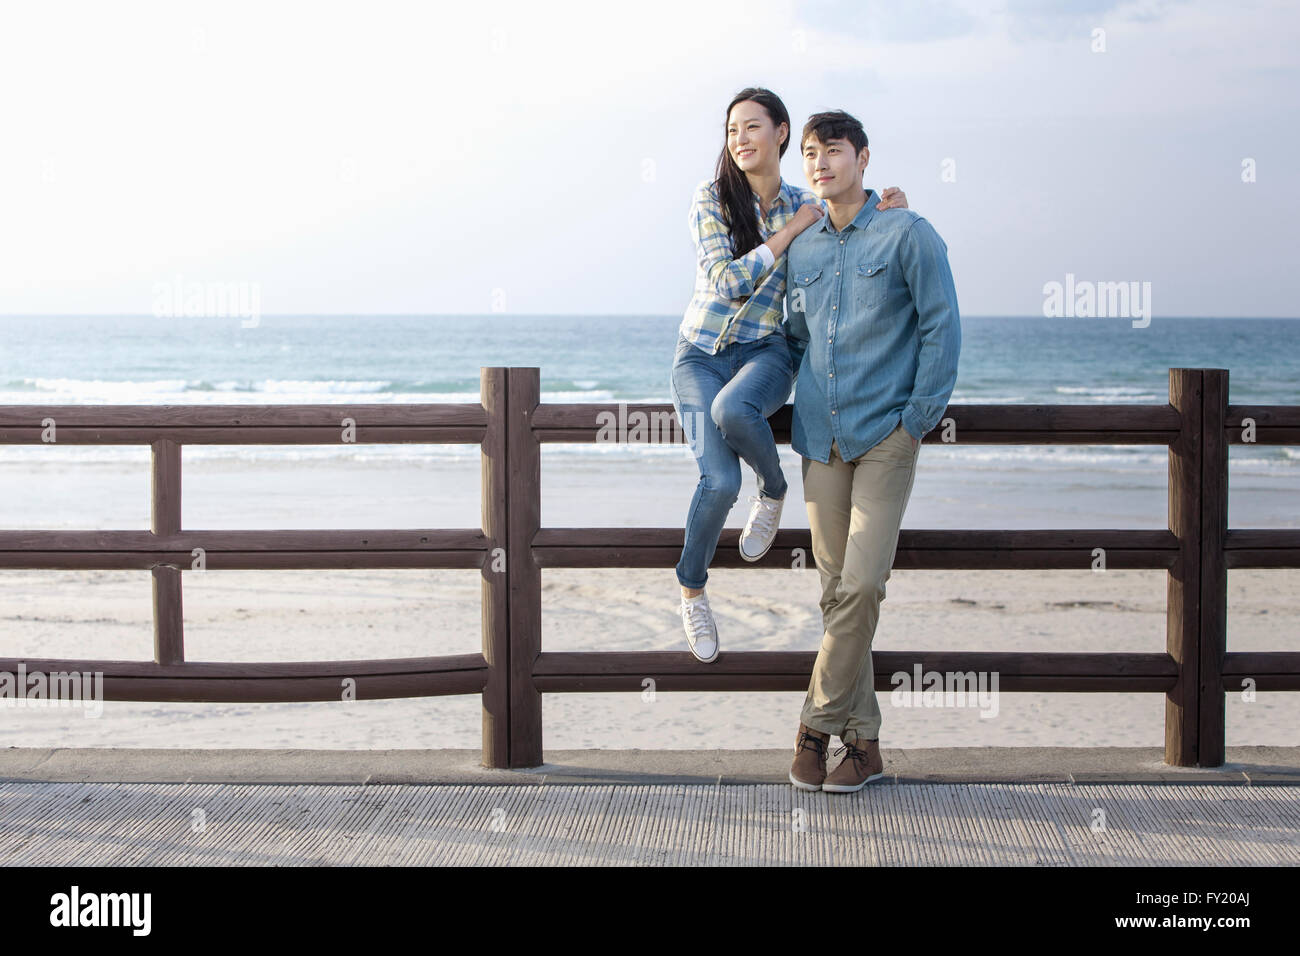 Woman sitting on a fence and a man leaning his body on a fence along the beach Stock Photo